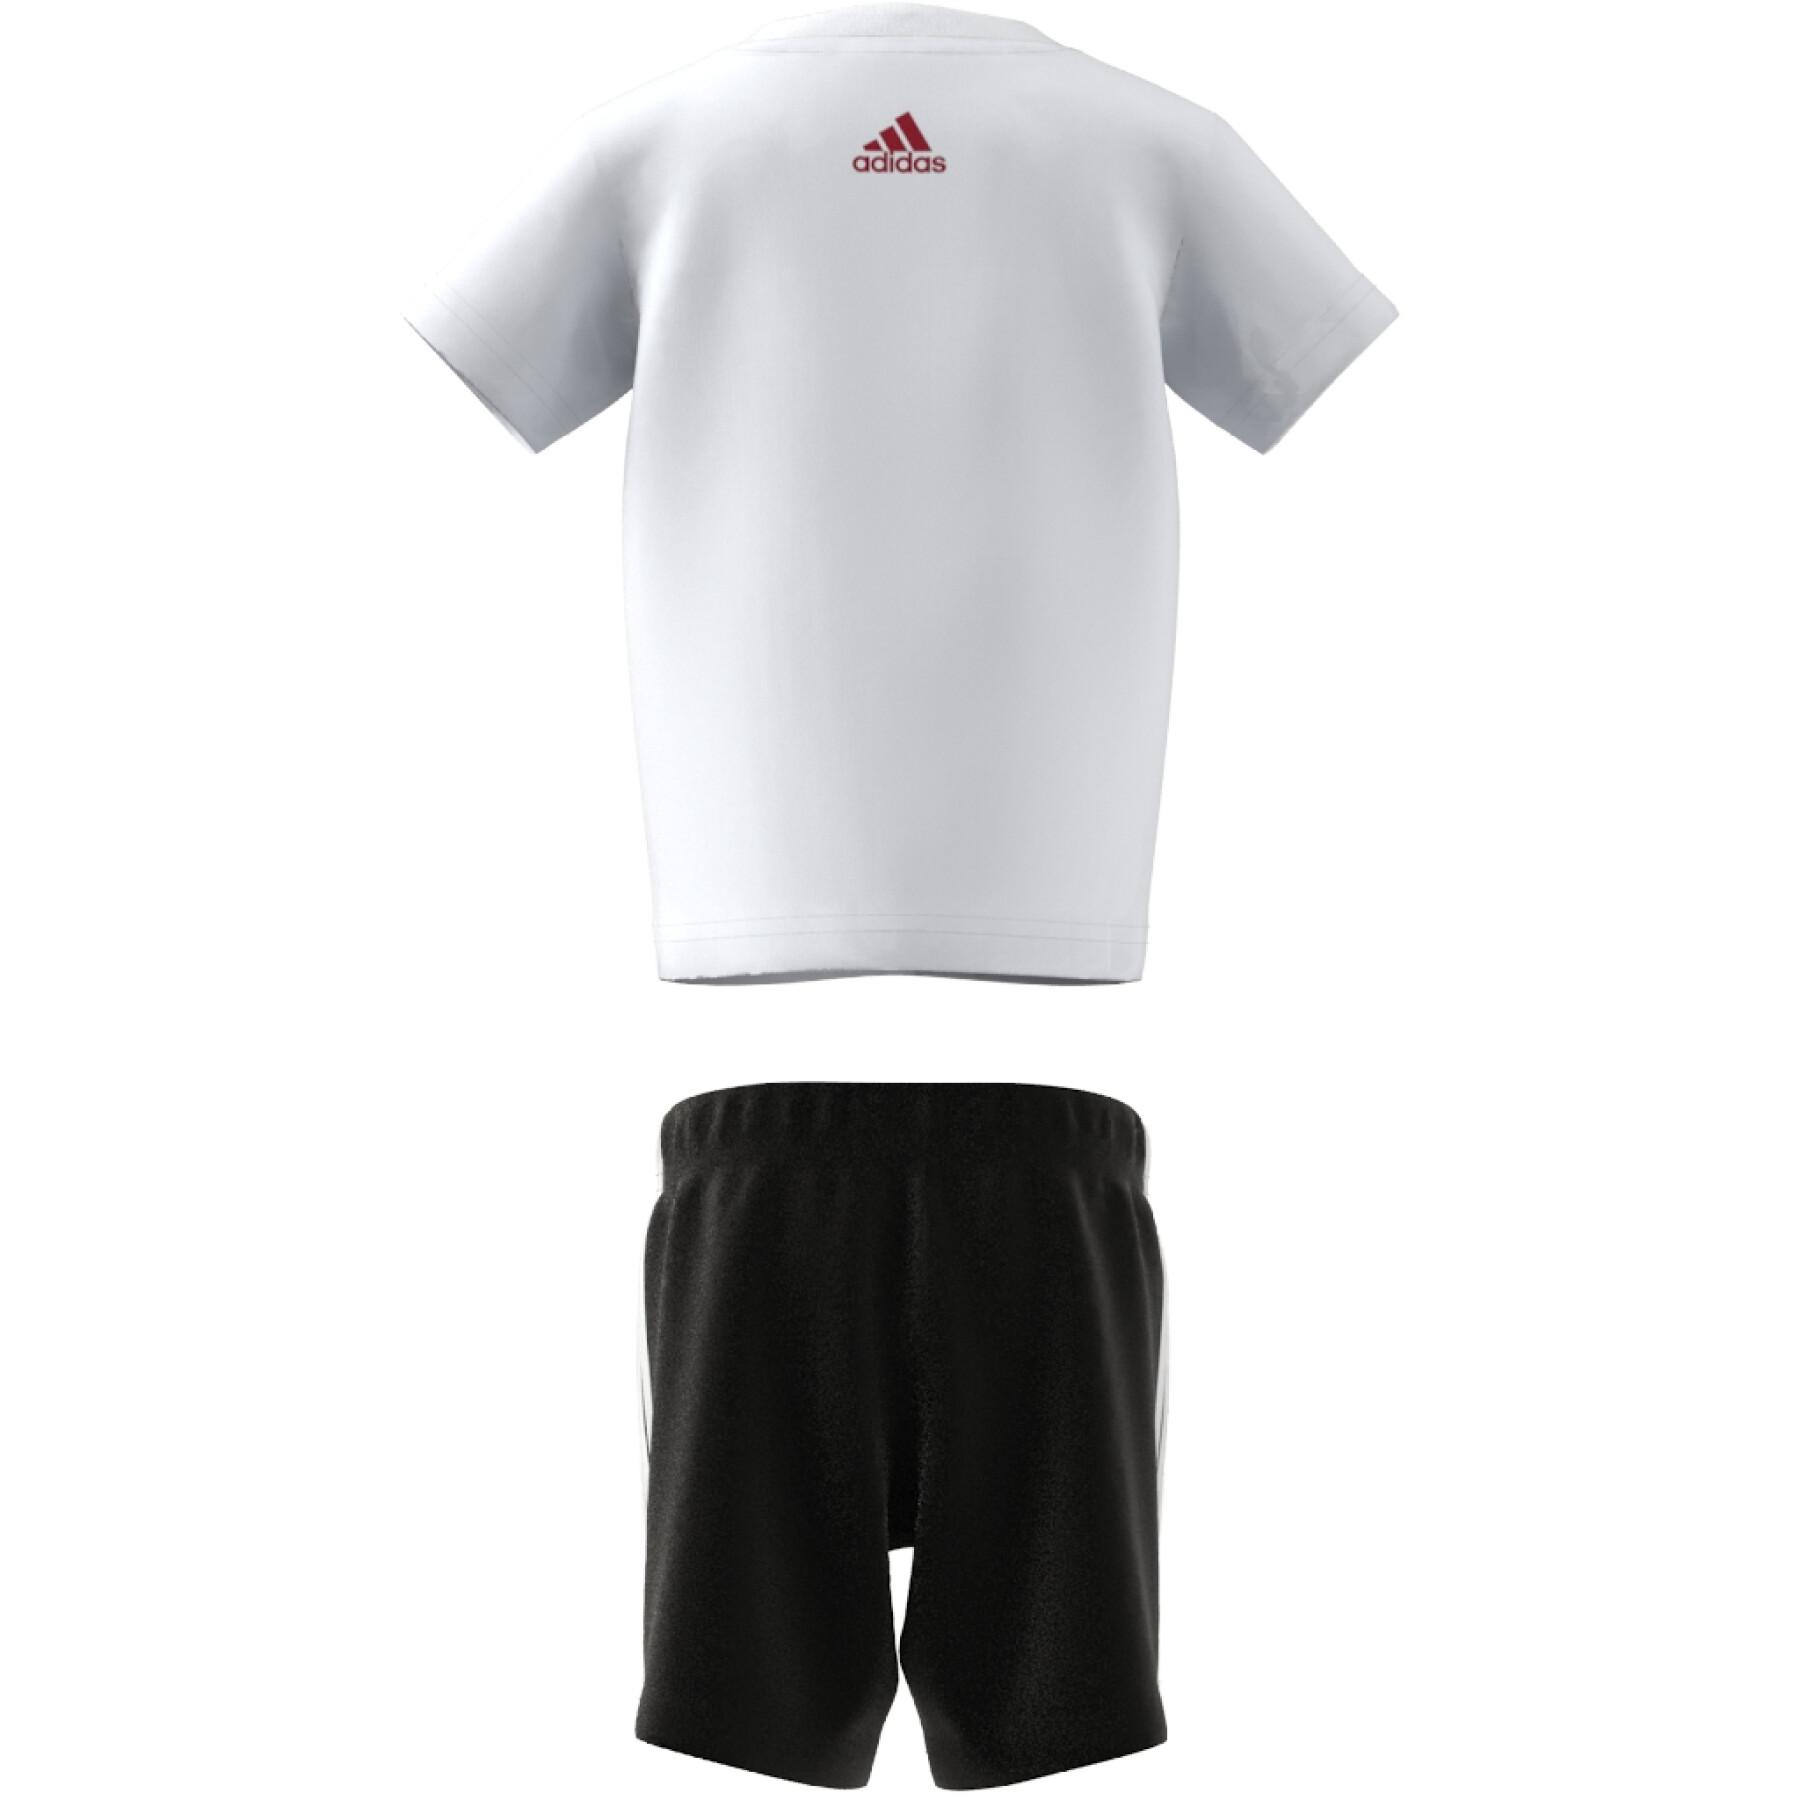 shorts 3-Stripes and set Lineage Brands adidas Essentials - Lifestyle t-shirt Organic - adidas - cotton